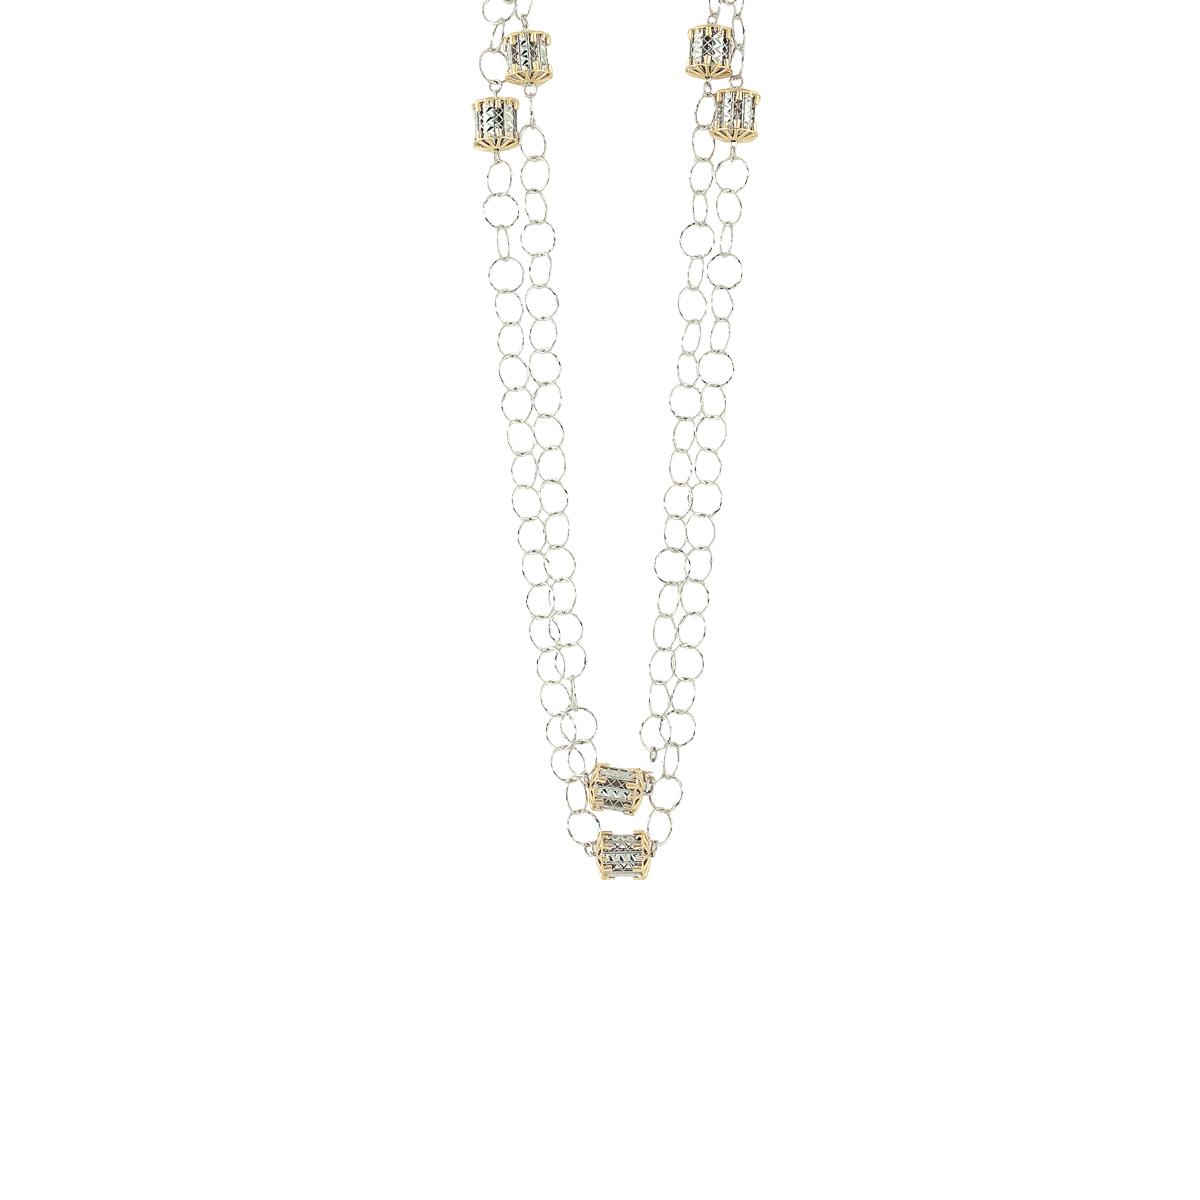 Chanel necklace in 925 rhodium-plated and gilded silver - ZCL980-LN